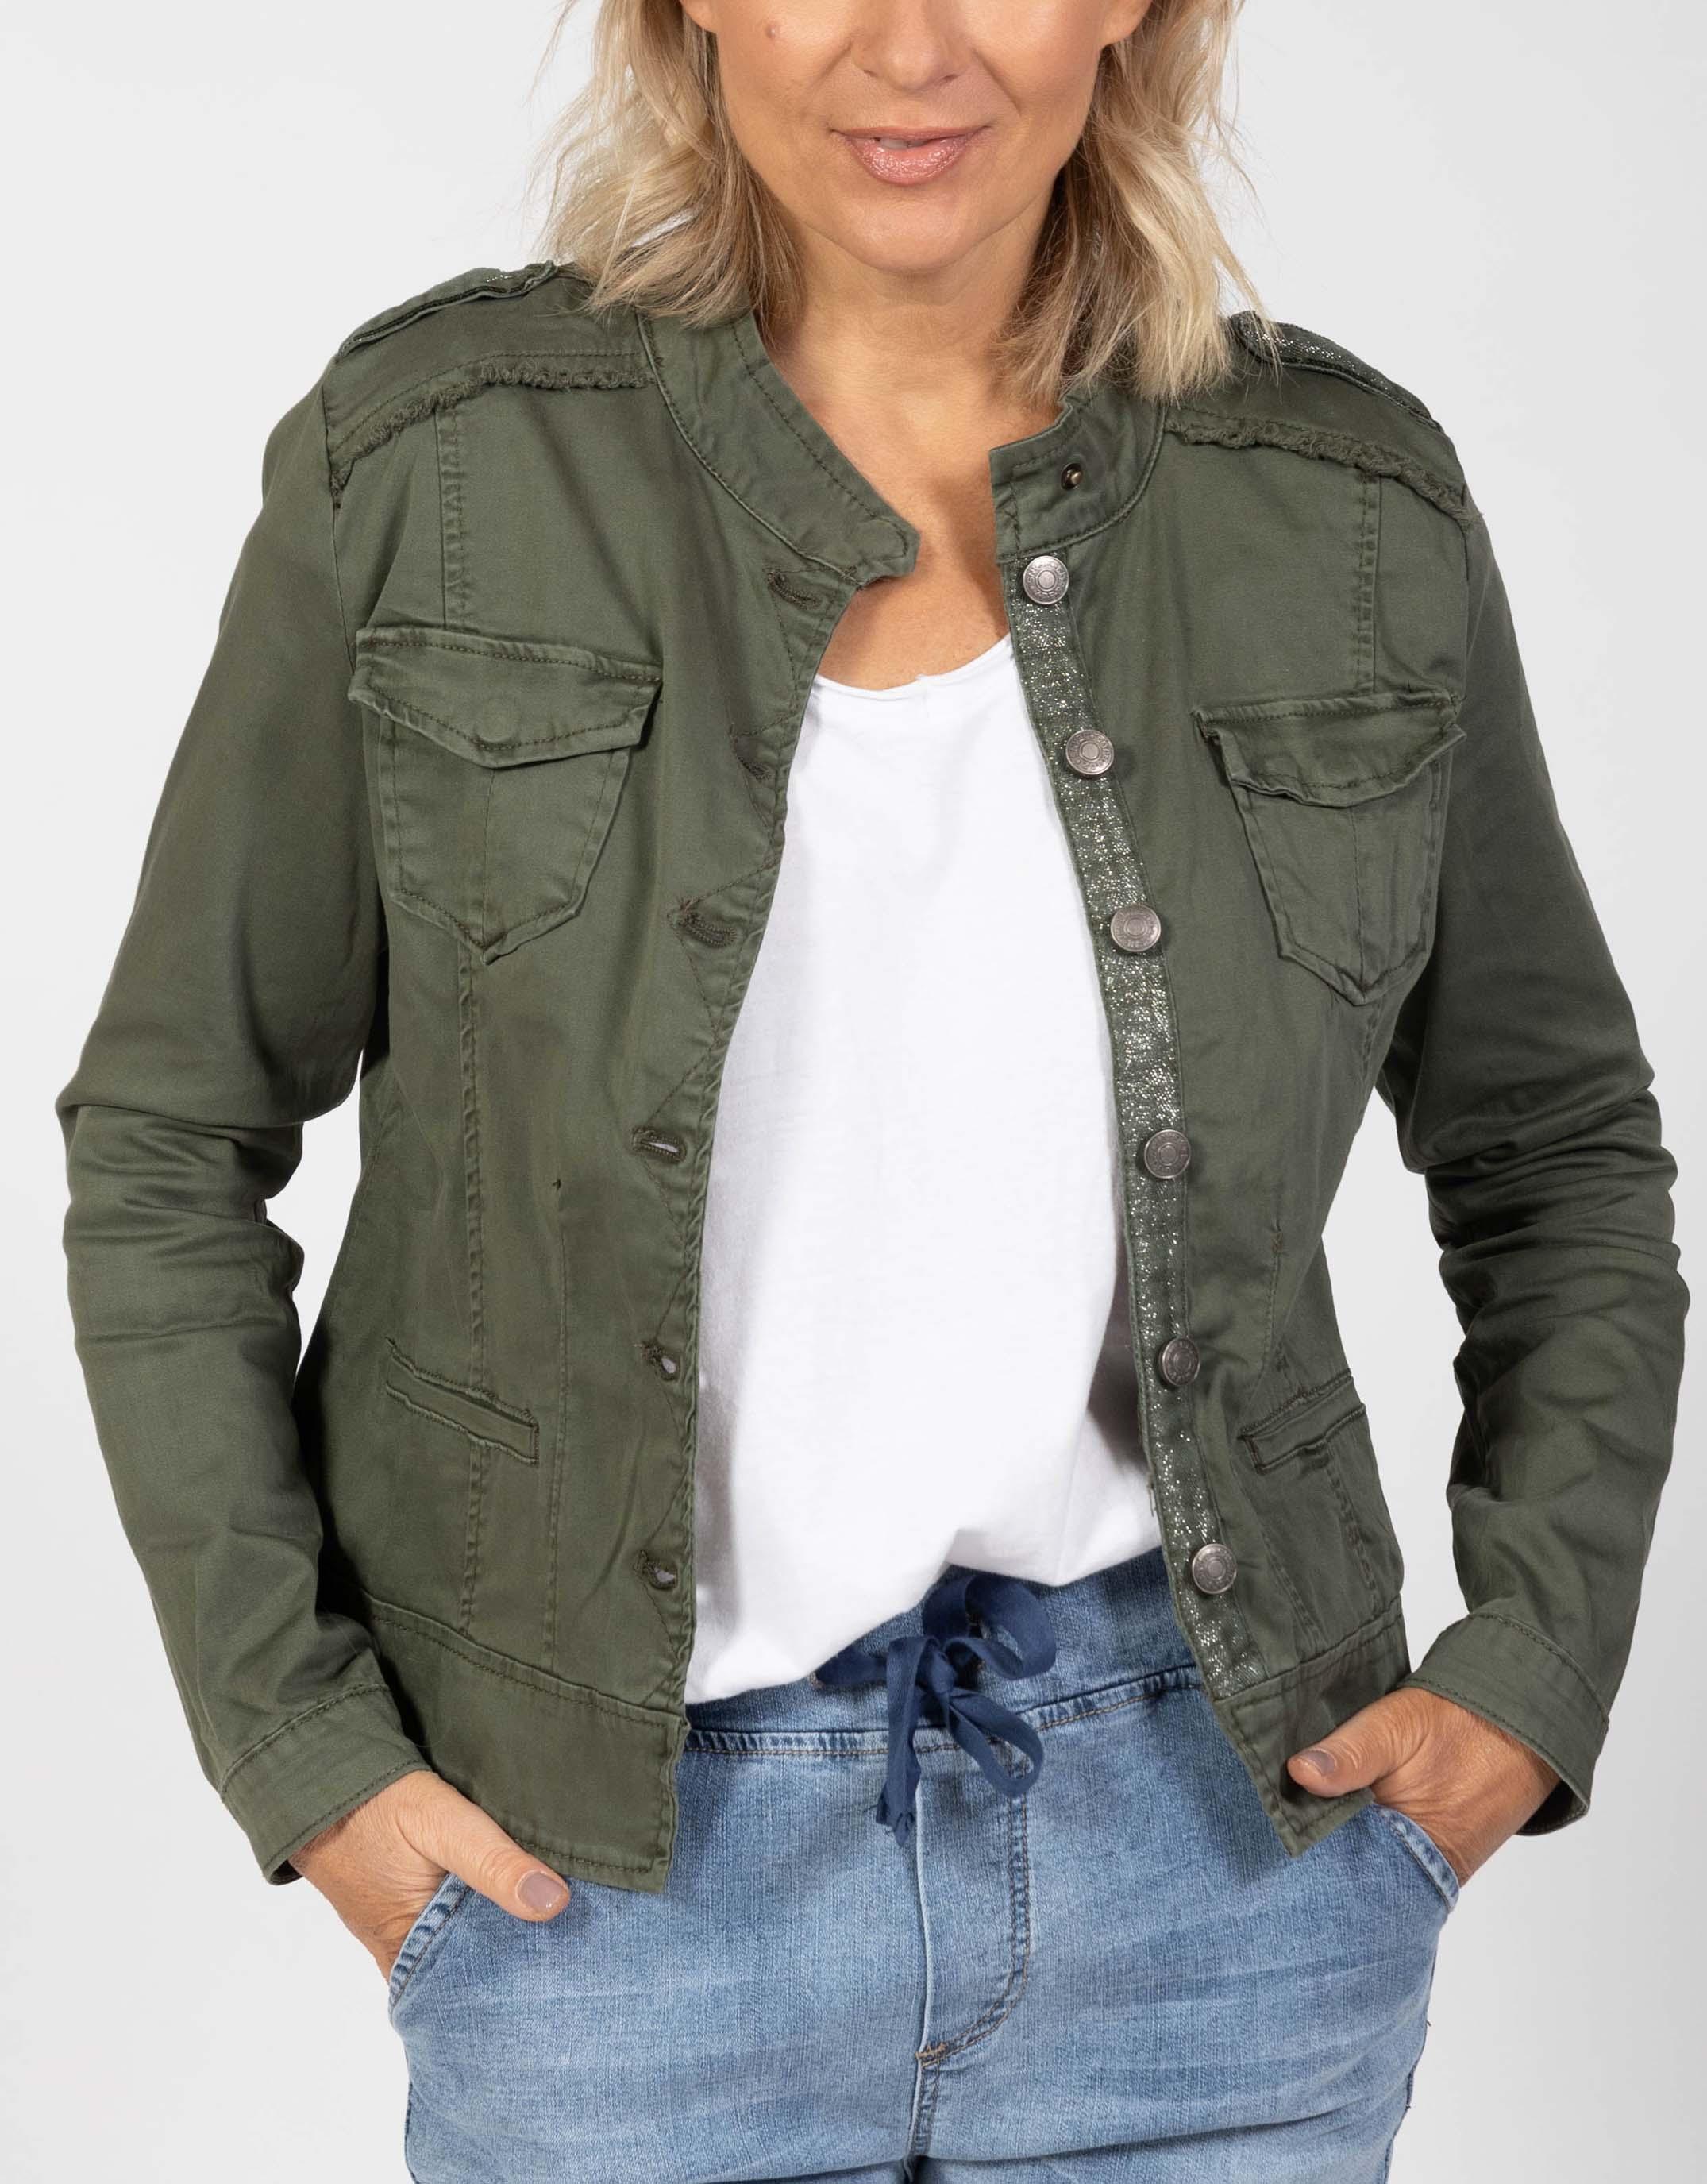 Giallino Army Green Jean Jacket for Women fashion Denim Ripped Distressed  Jacker for Womens Coat Long Sleeve S at Amazon Women's Coats Shop